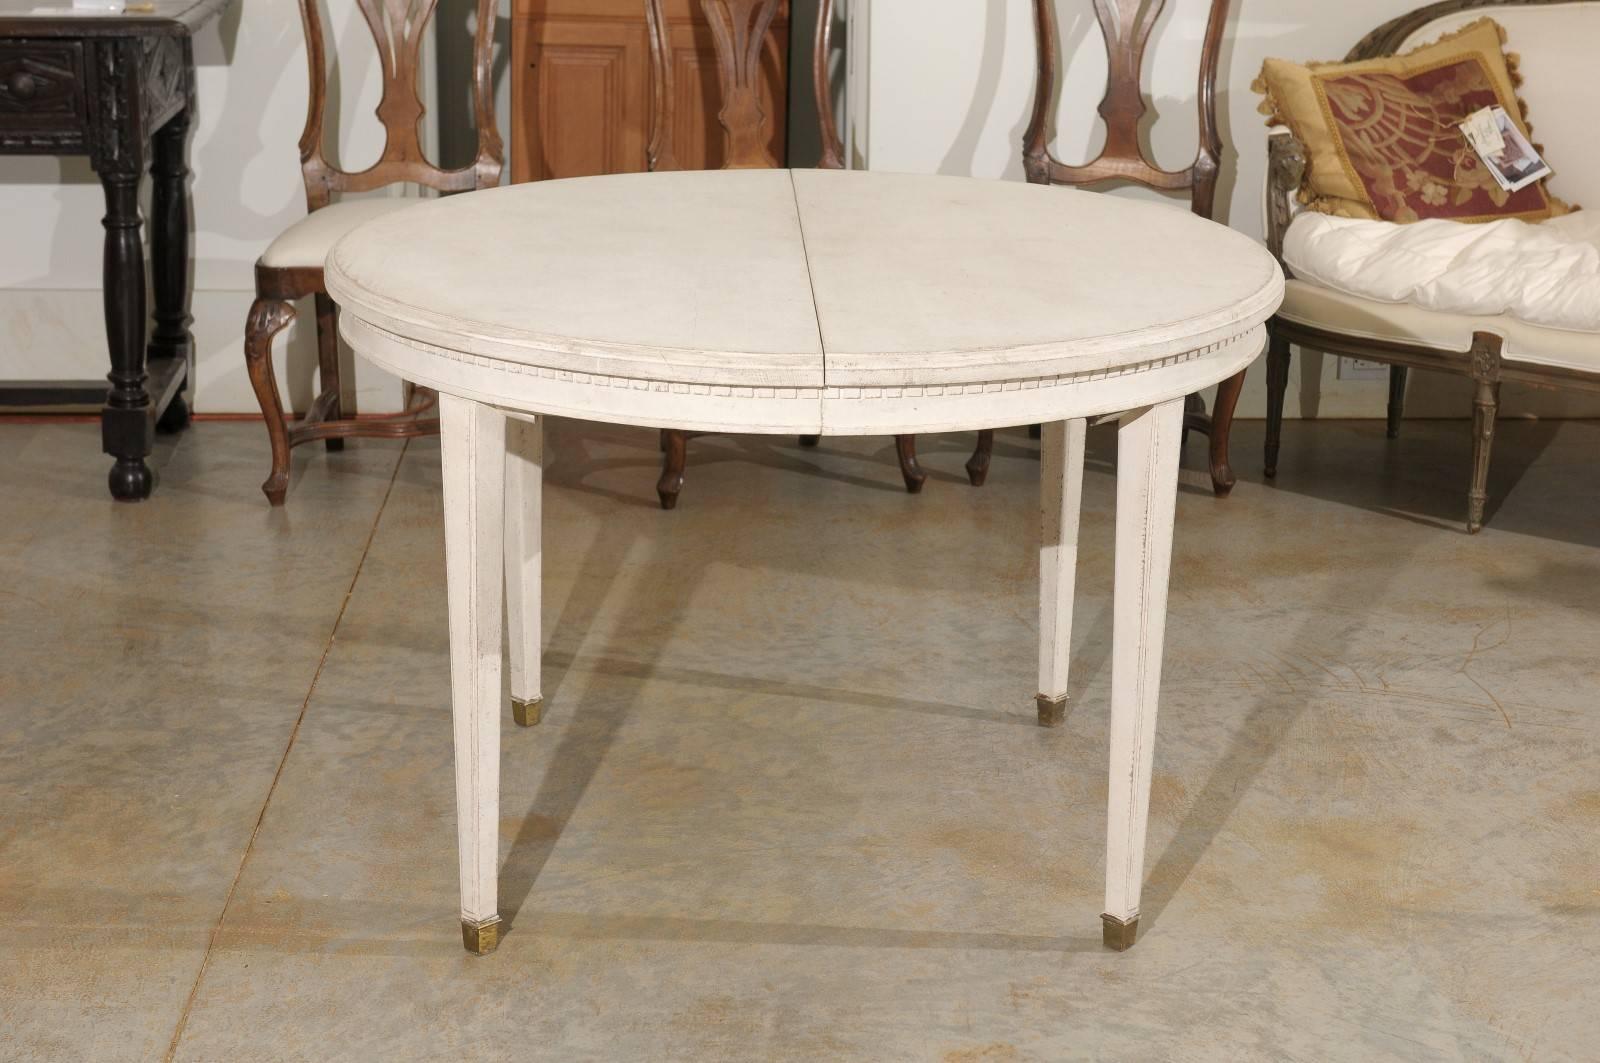 Swedish Gustavian Style Oval Dining Room Table with Extensions and Tapered Legs 2